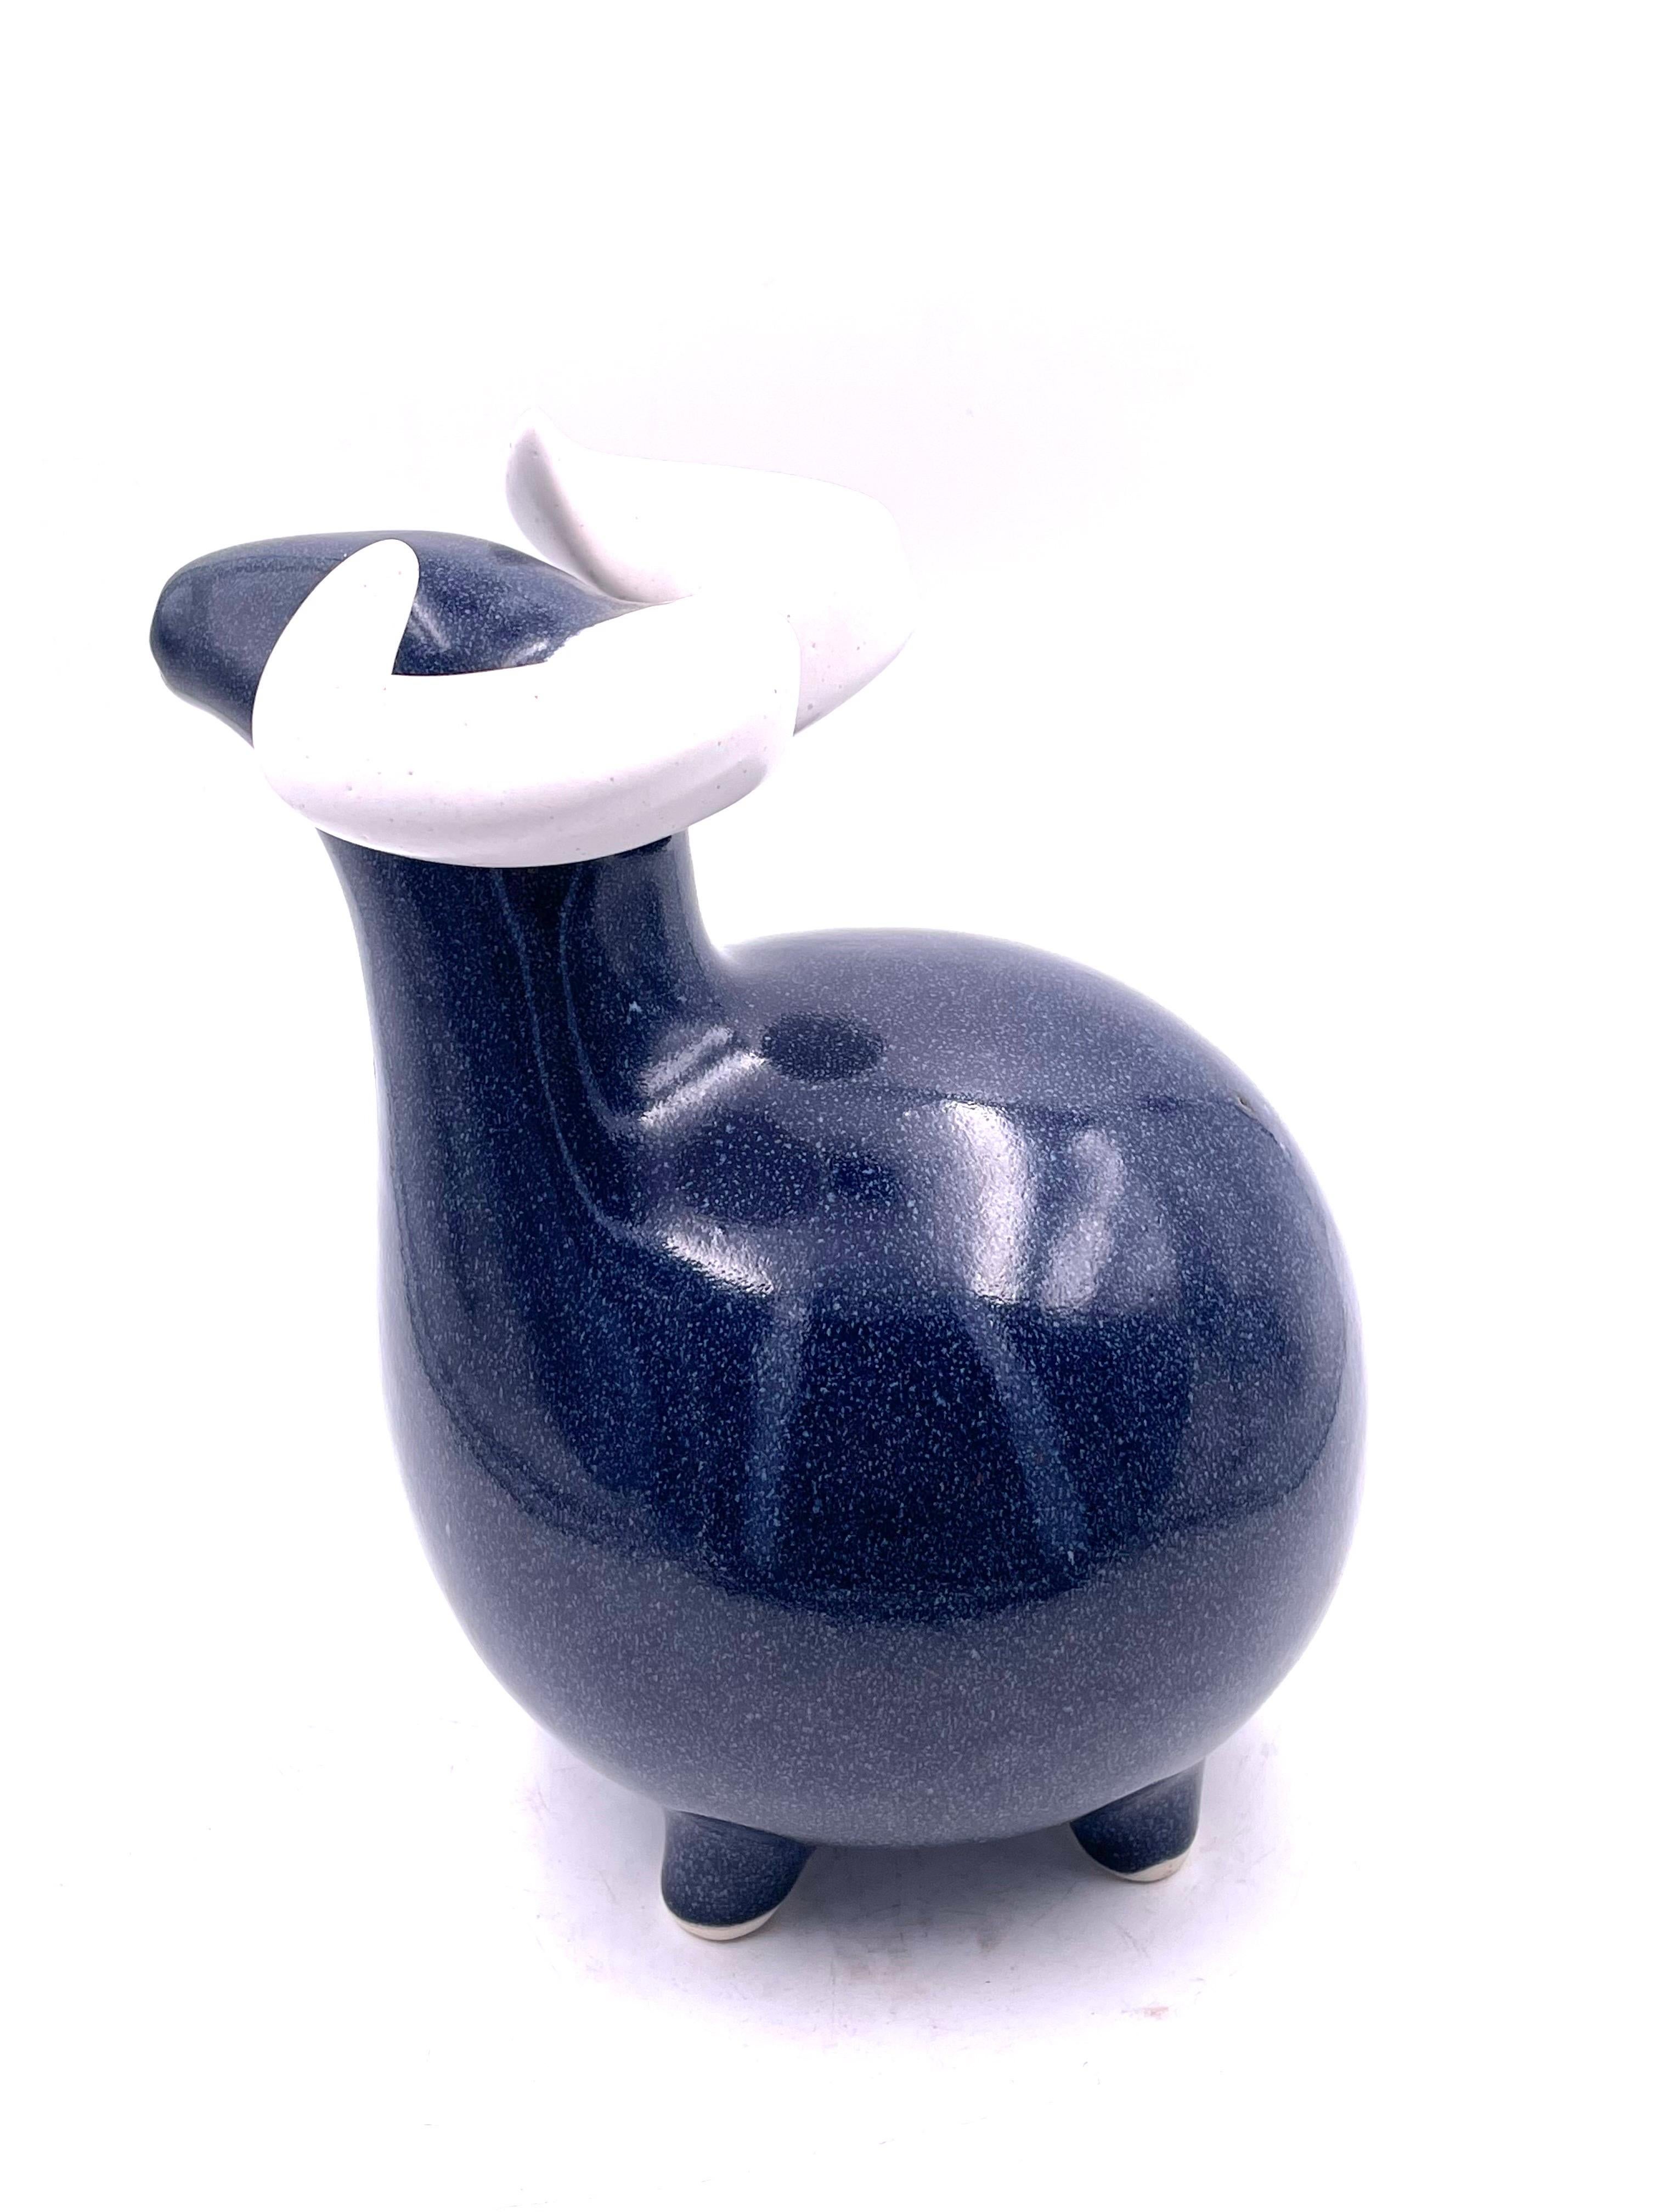 Beautiful glaze on this ceramic ram sculpture from 1980s. we believe it's made by Arabia of Finland but it's unmarked.